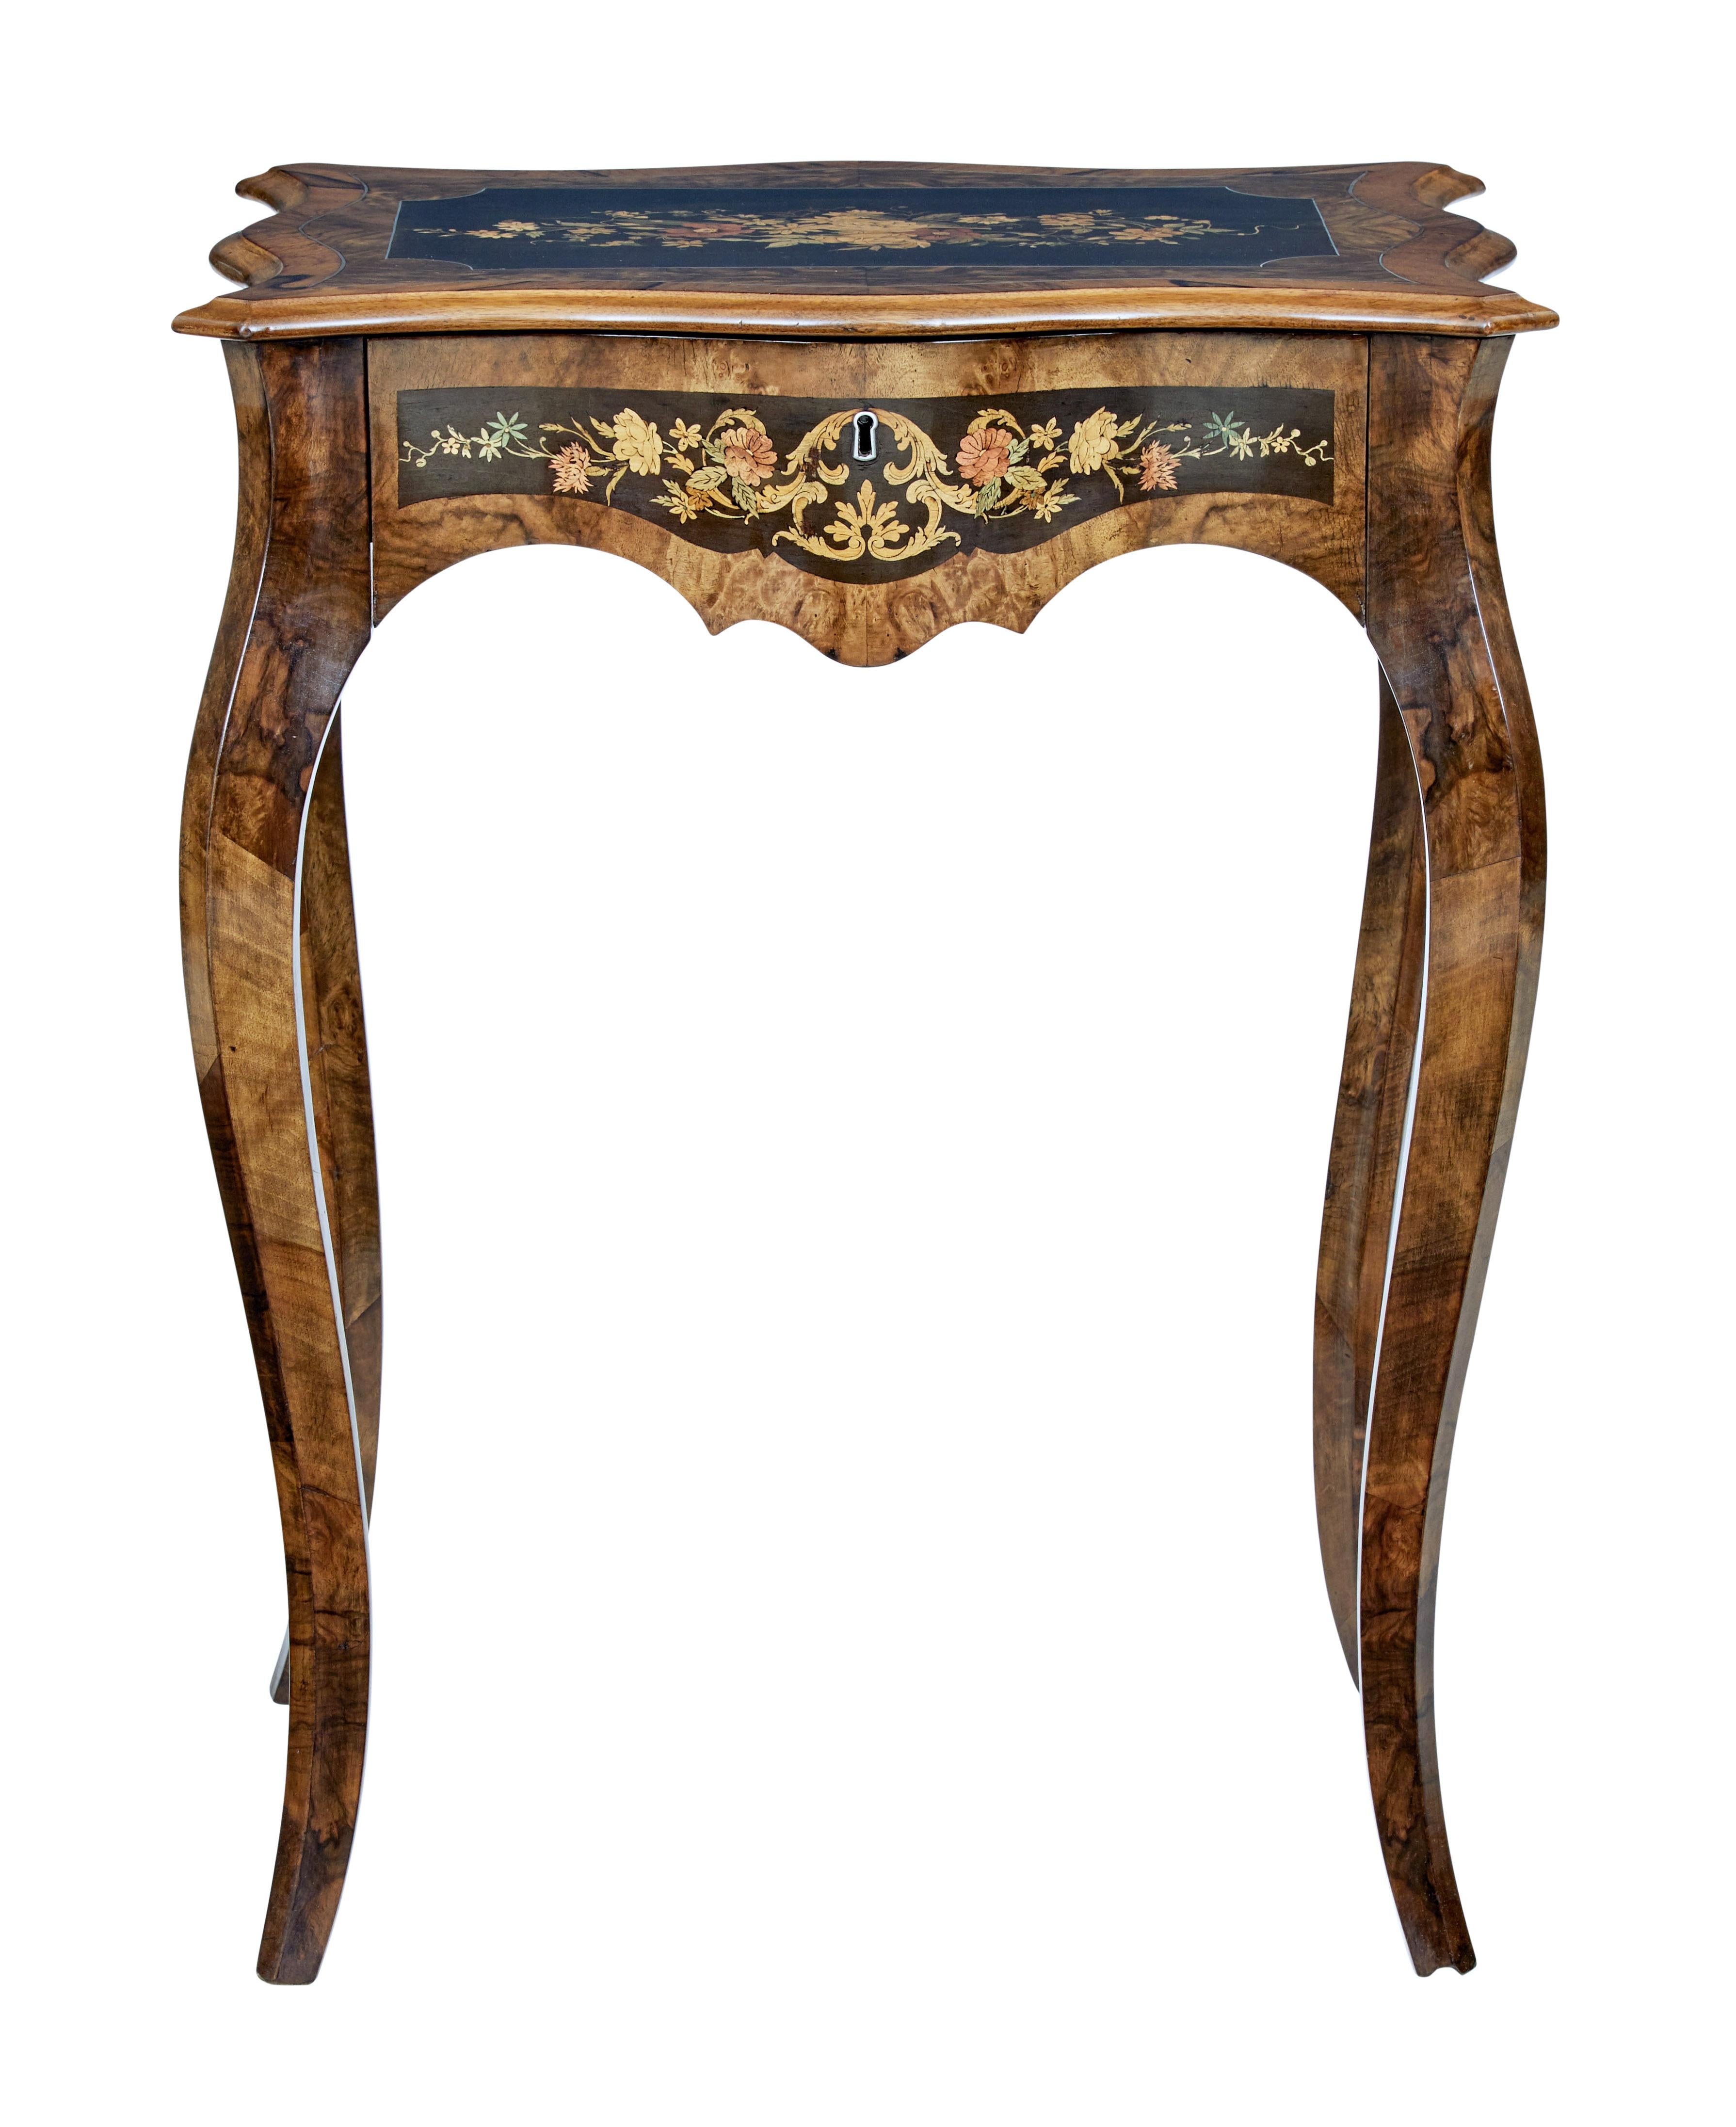 19th century walnut and inlaid work table, circa 1880.

Beautiful inlaid walnut work table with fitted drawer. Serpentine shaped on all 4 sides. Stained black cartouche shaped central panel, beautifully inlaid boxwood, tulipwood and birch,